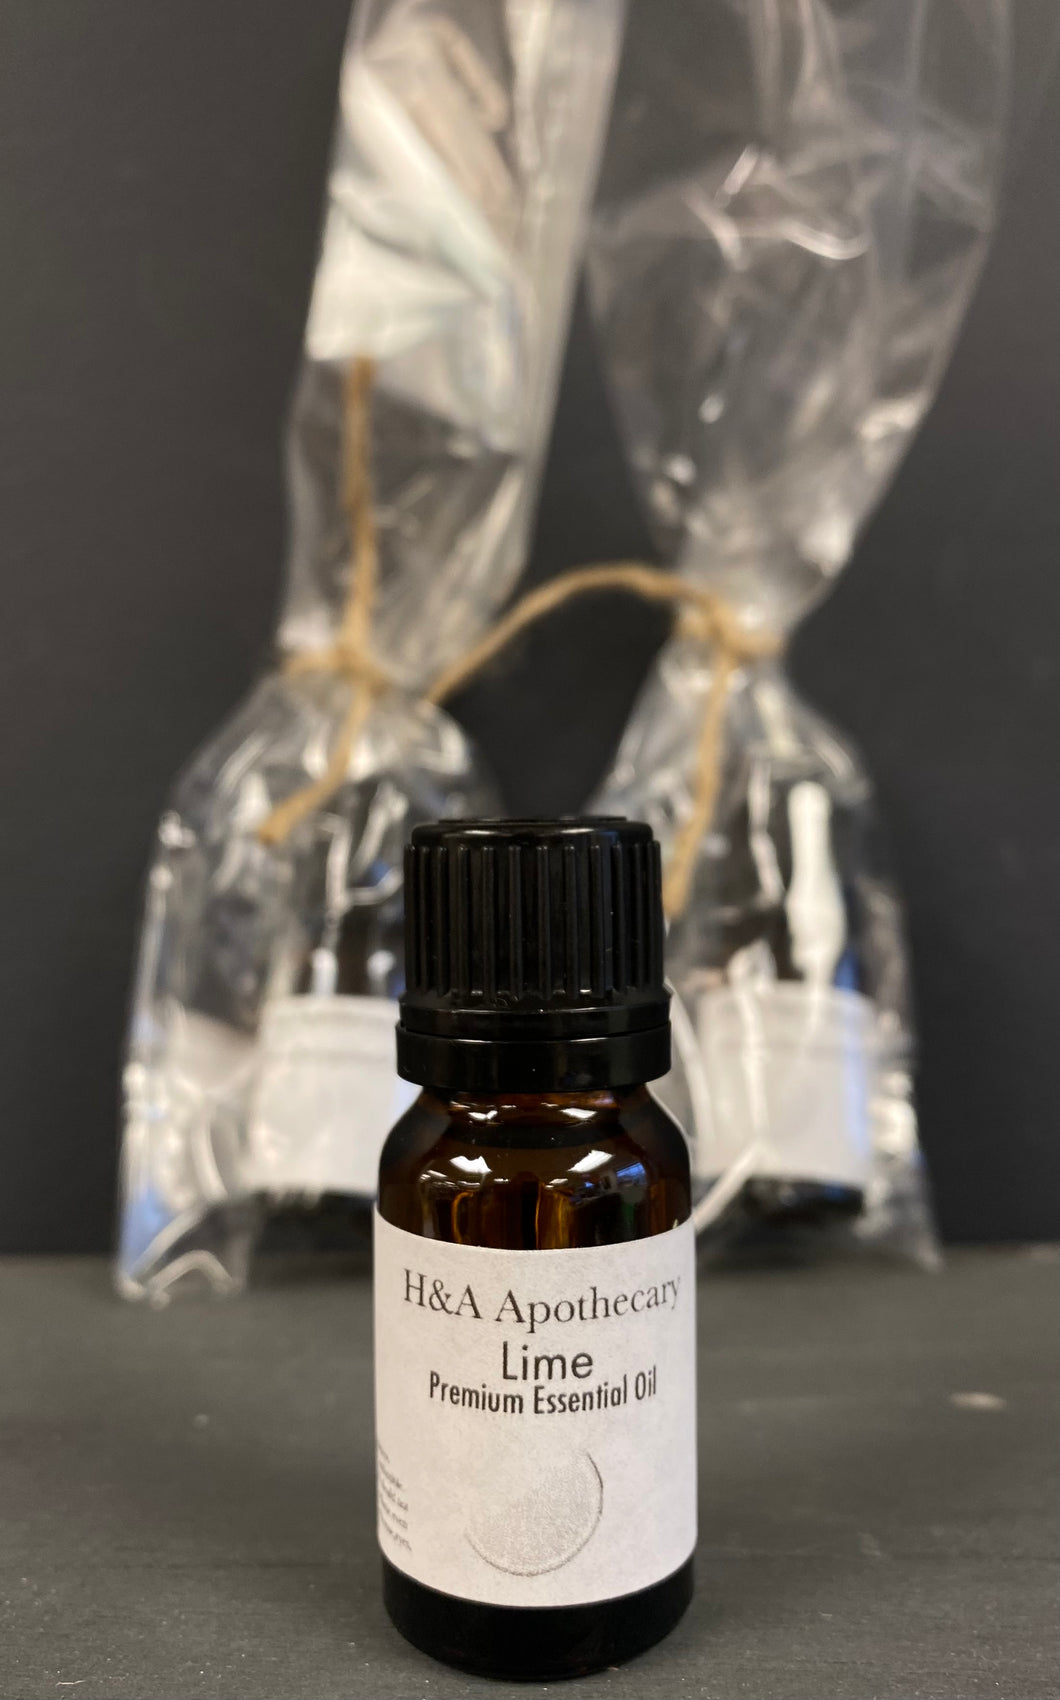 H&A Apothecary Premium Lime Essential Oil